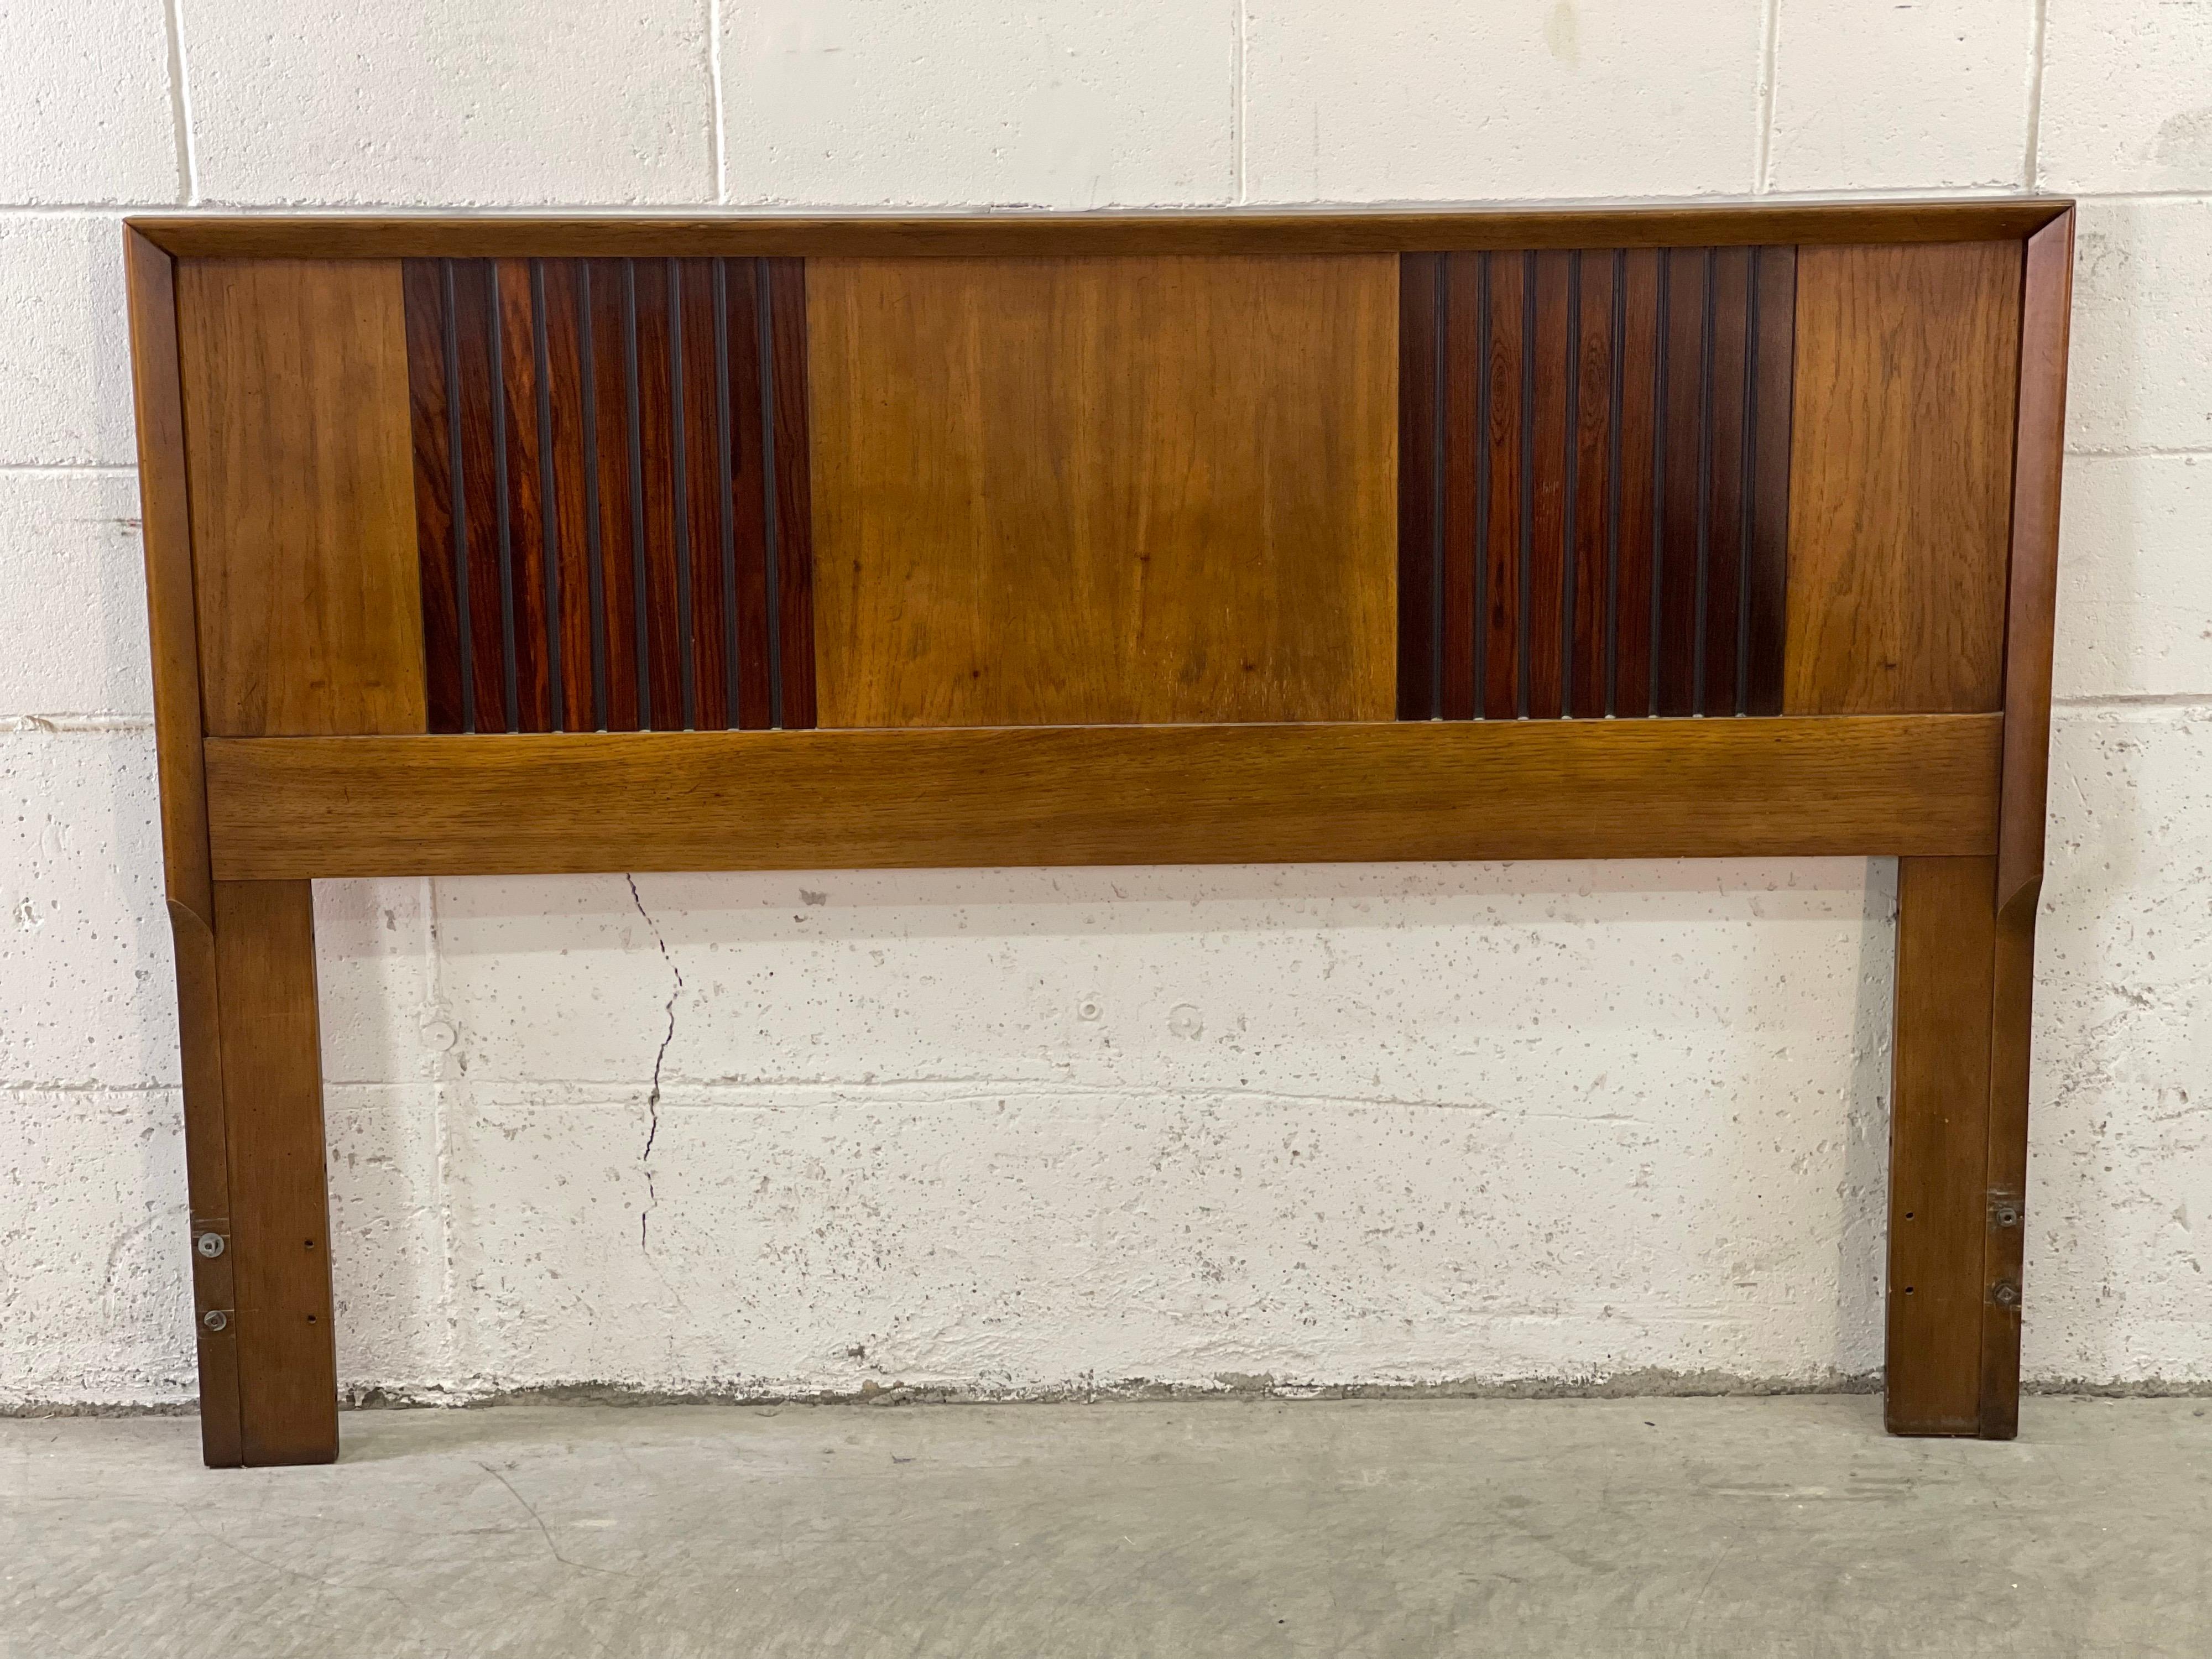 Vintage 1960s Lane Furniture headboard in walnut with rosewood veneered accents slats in the middle. Excellent used condition. No marks.